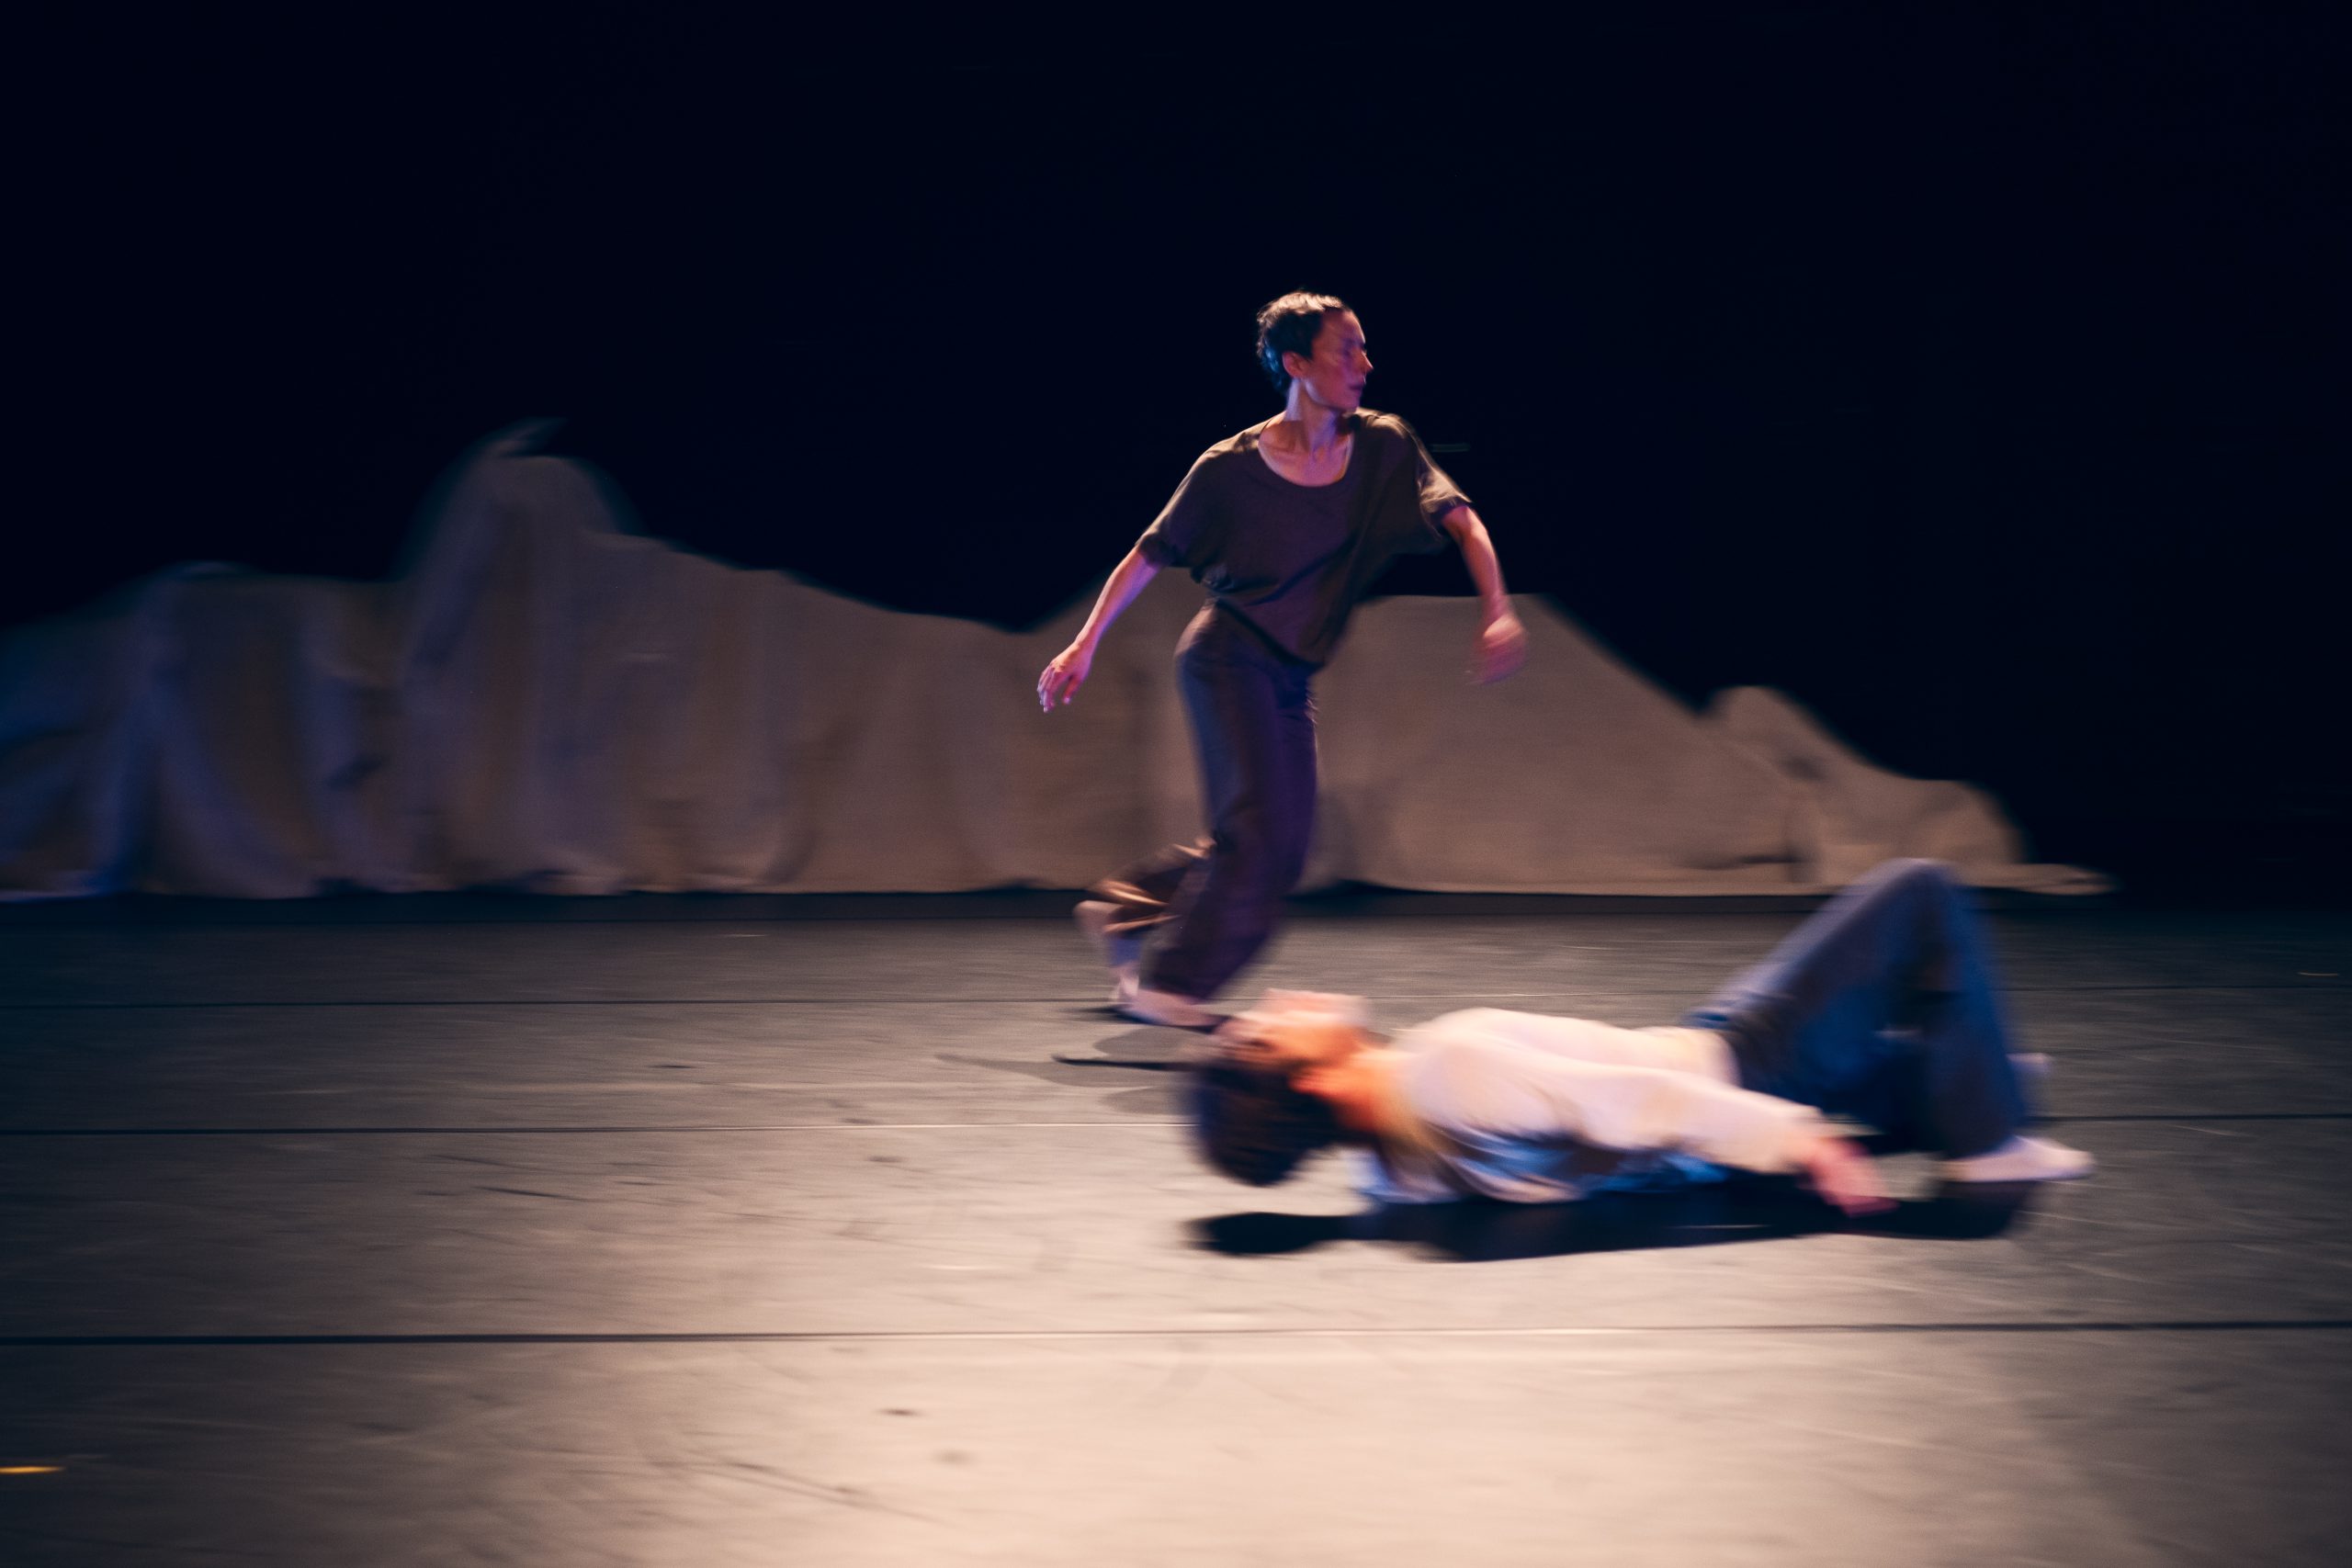 A woman is running on stage, a man is lying on the floor. A dynamic scene.